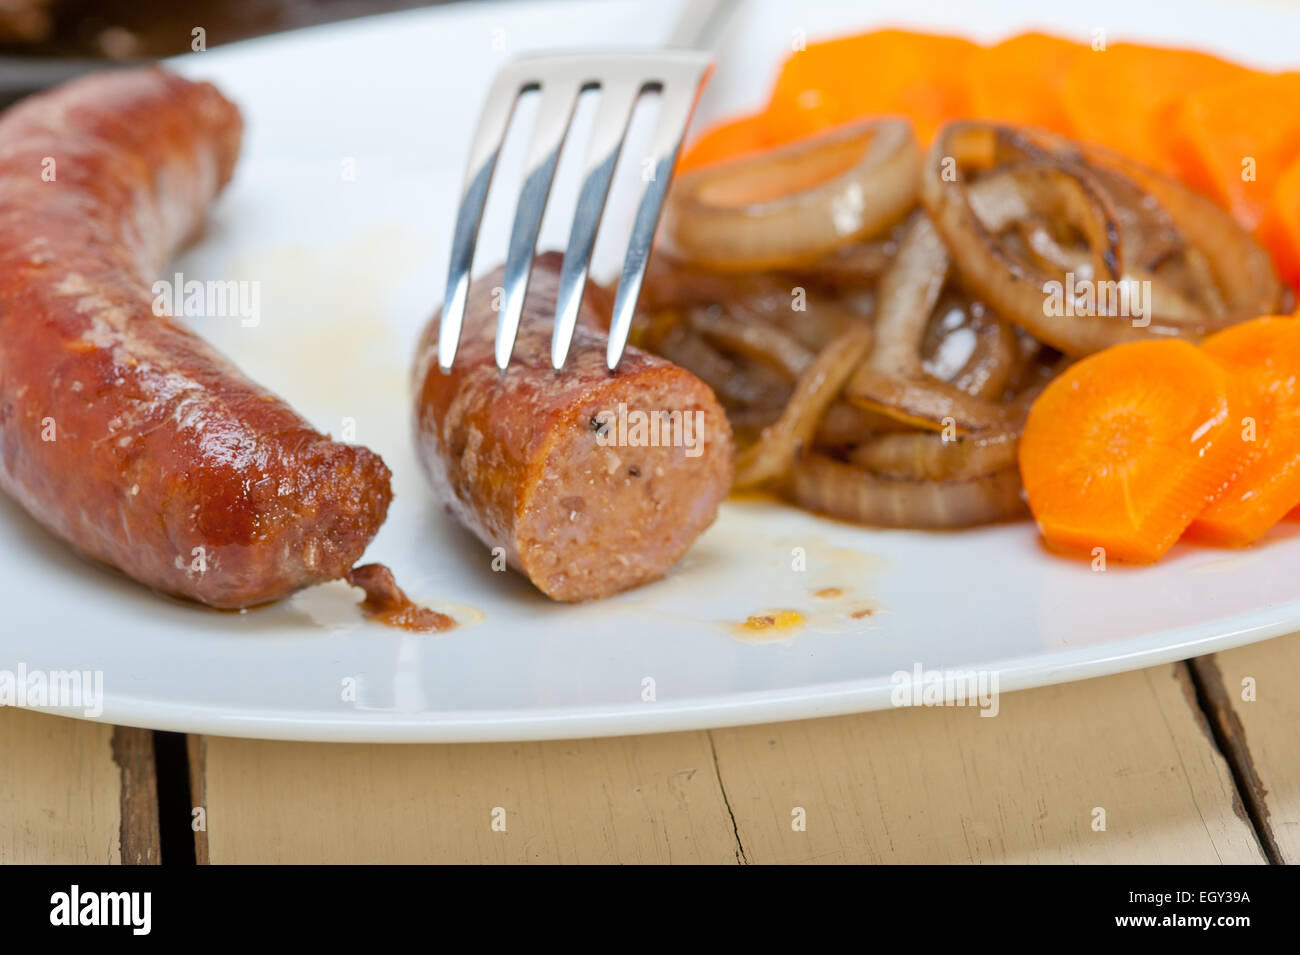 beef sausages cooked on iron skillet with carrot and onion Stock Photo